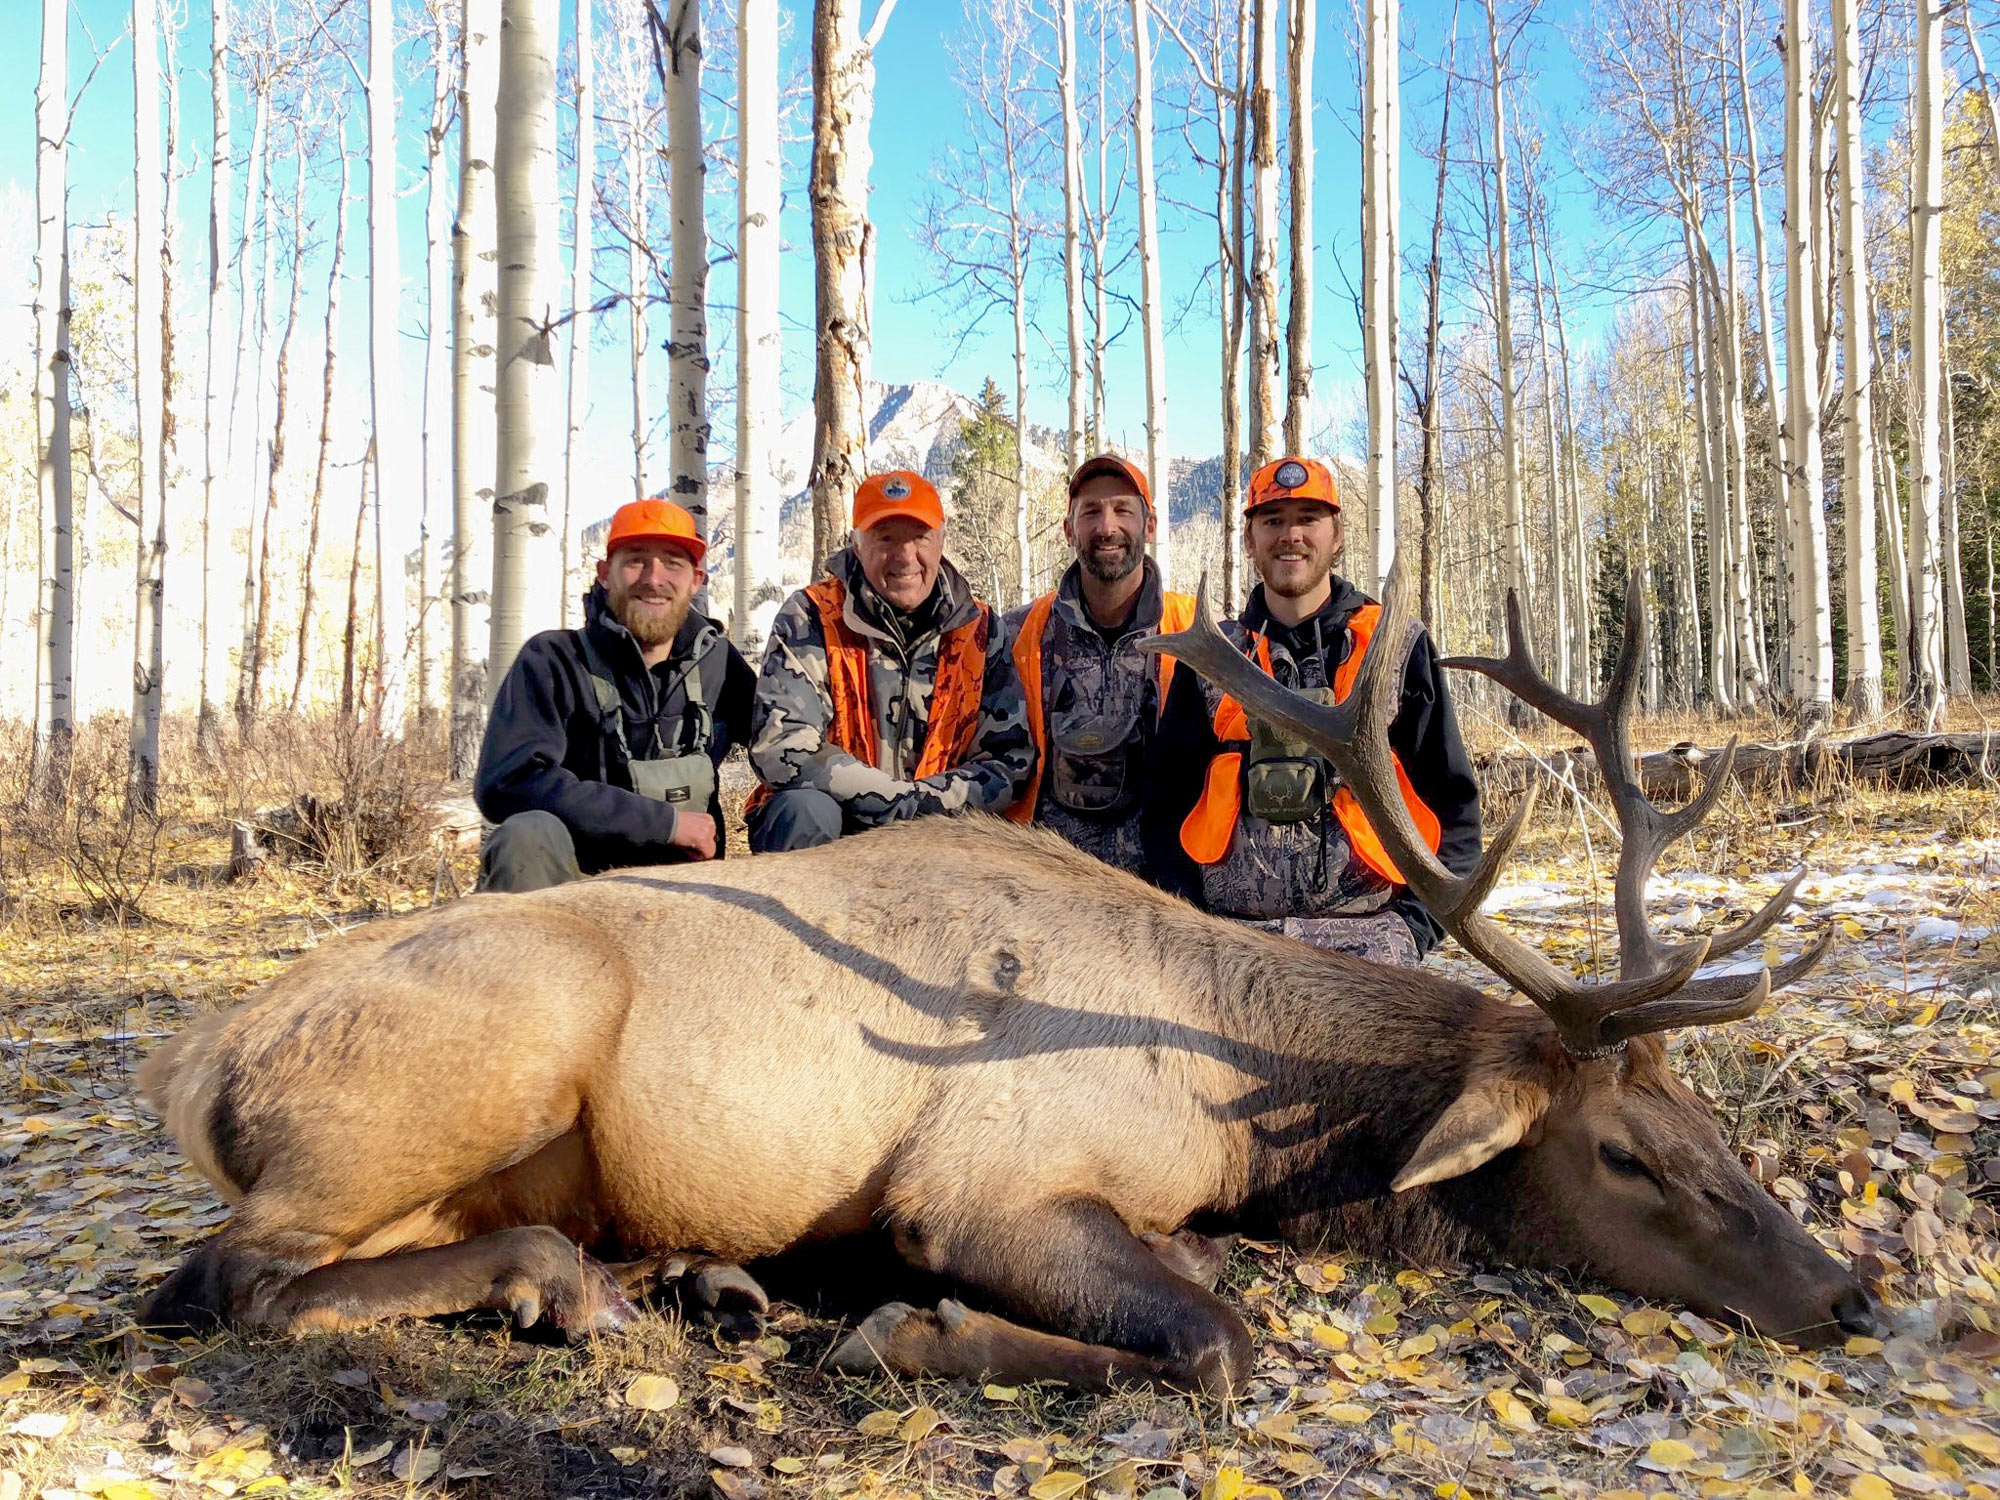 Elk harvested by hunting with horses